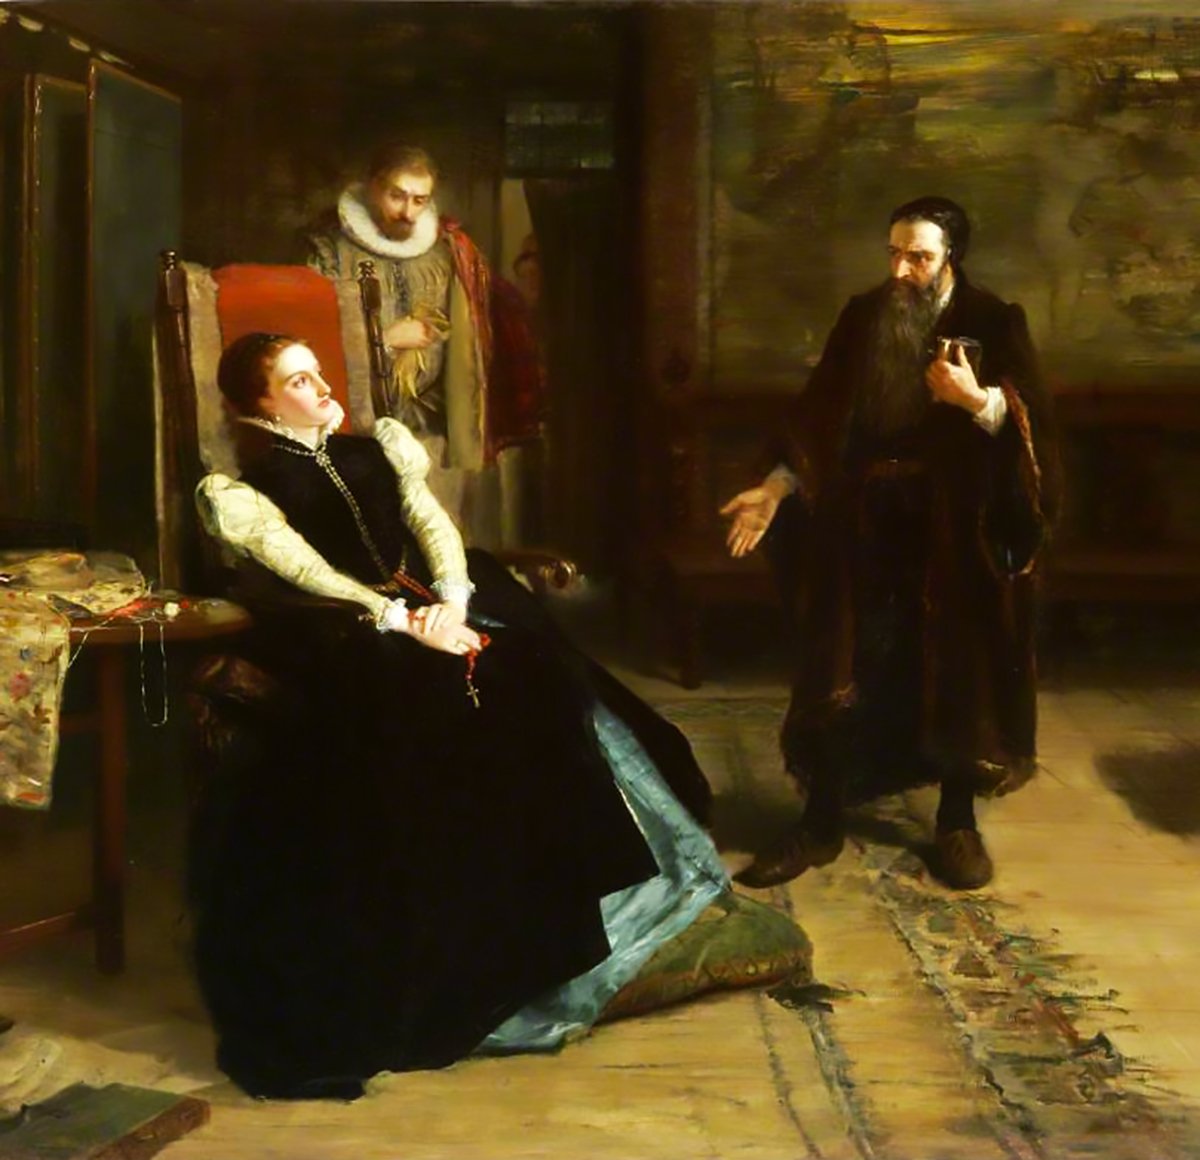 Painting depicting an intense indoor scene with Mary, Queen of Scots, seated in a lavish chair. She wears a regal gown with a white bodice, black skirt, and blue lining, her expression focused and slightly wary. To her right stands John Knox, a bearded man with an earnest and animated posture, wearing dark robes and engaging in animated discourse. Behind Mary, another dignified man in a ruffed collar and red cloak observes the interaction.